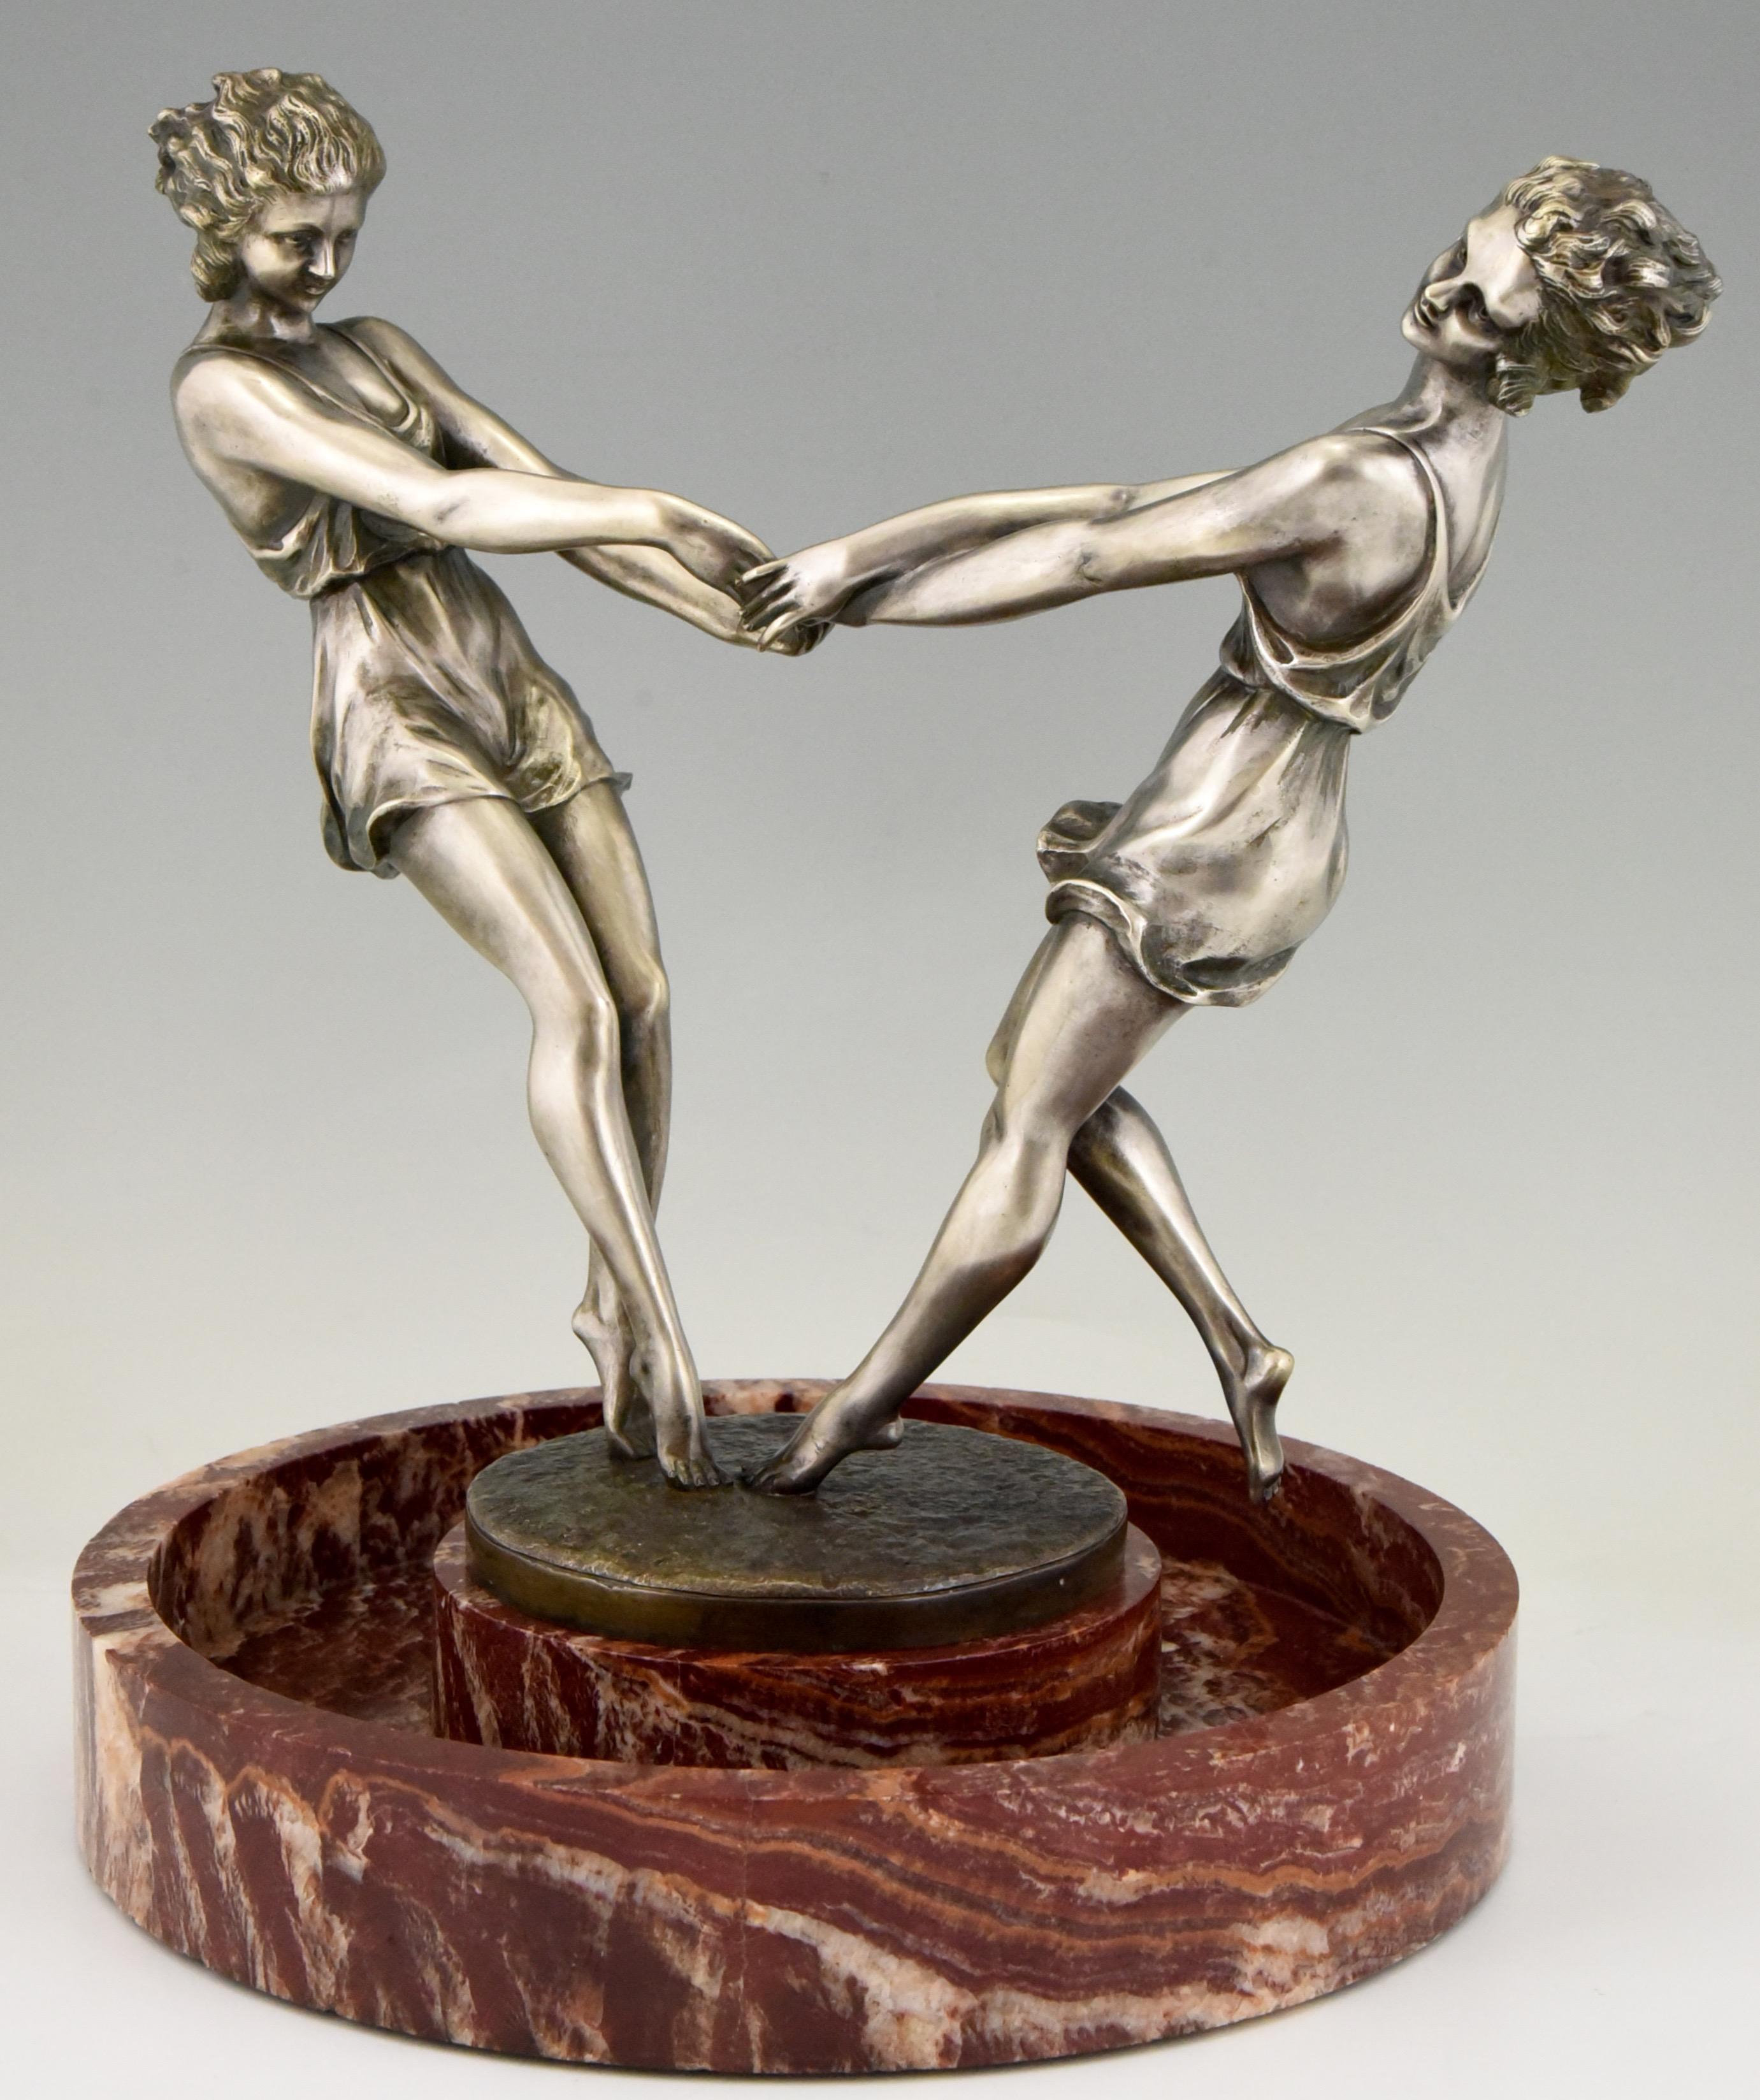 Whirling, spectacular circular marble centerpiece with a bronze sculpture of two dancing girls holding hands by the French artist Andre Gilbert, circa 1925.
The bronze has a silver patina.

This model is illustrated on page 155 of? “Art Deco and